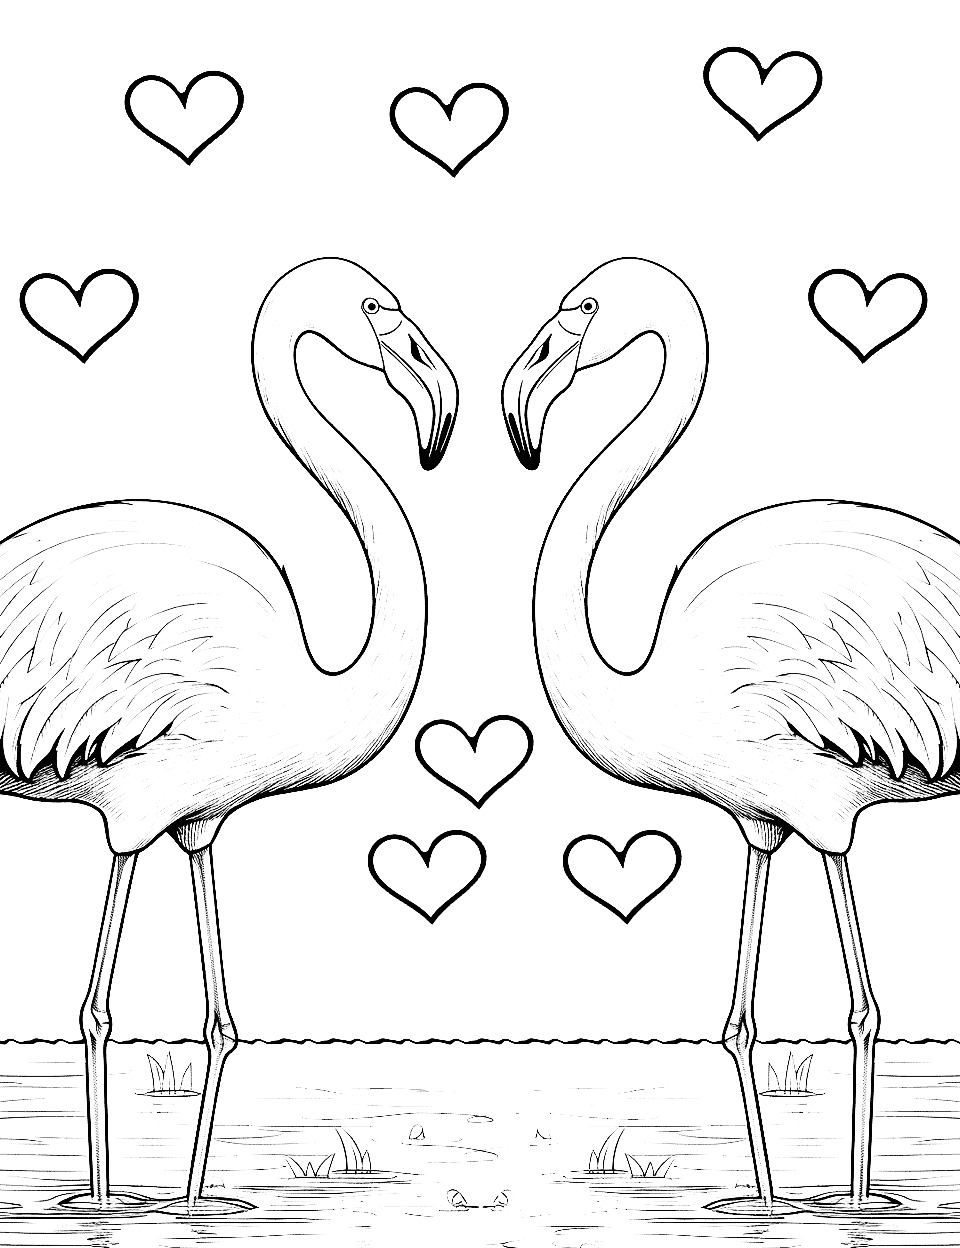 Valentine's Day Flamingo Scene Coloring Page - A scene with two flamingos surrounded by Valentine’s Day elements.